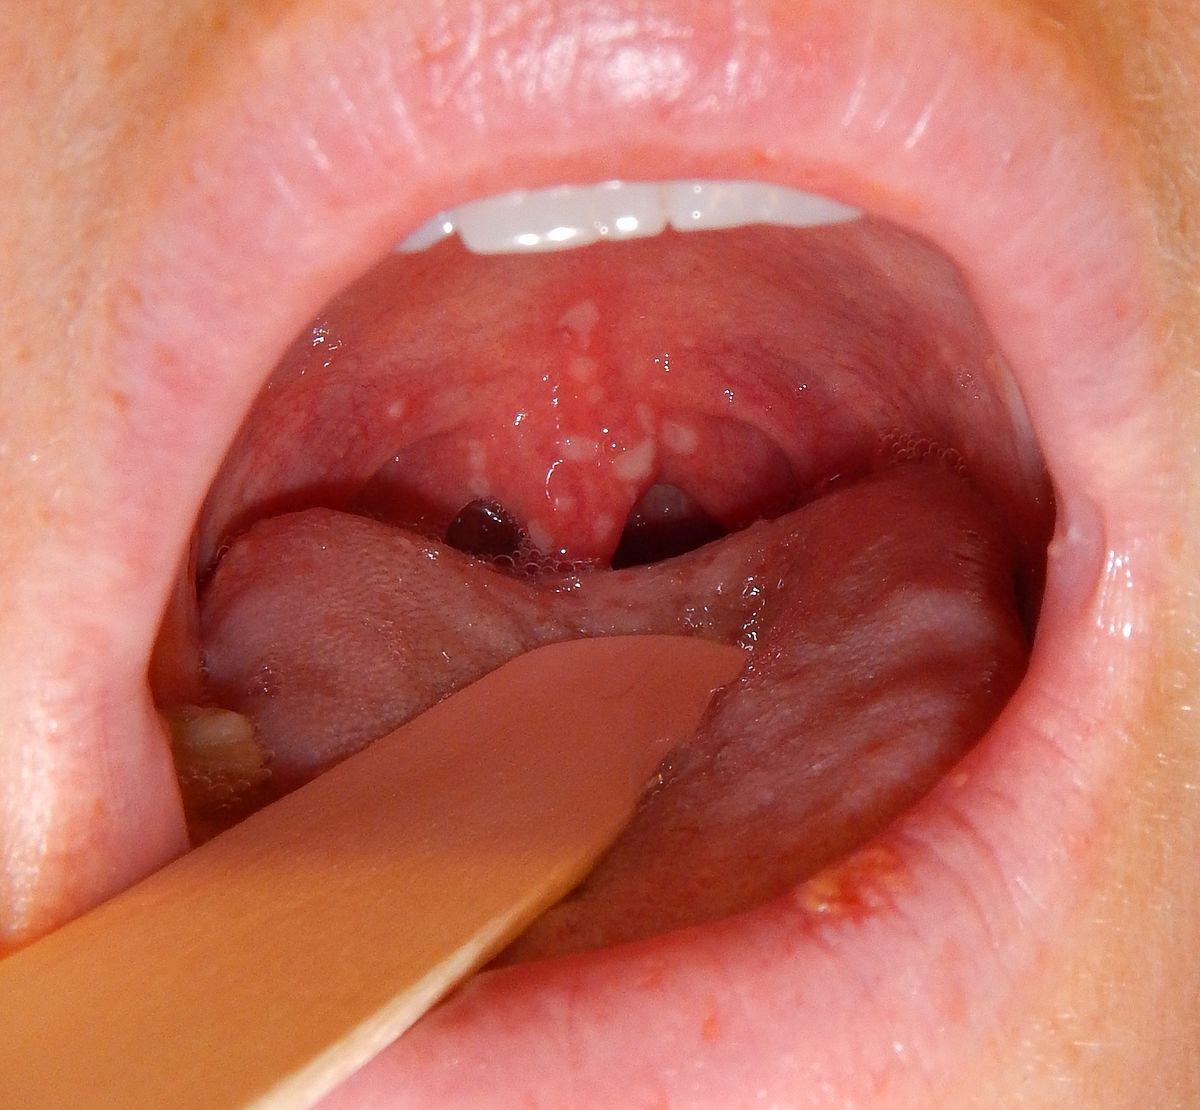 Tongue hurts after cunnilingus